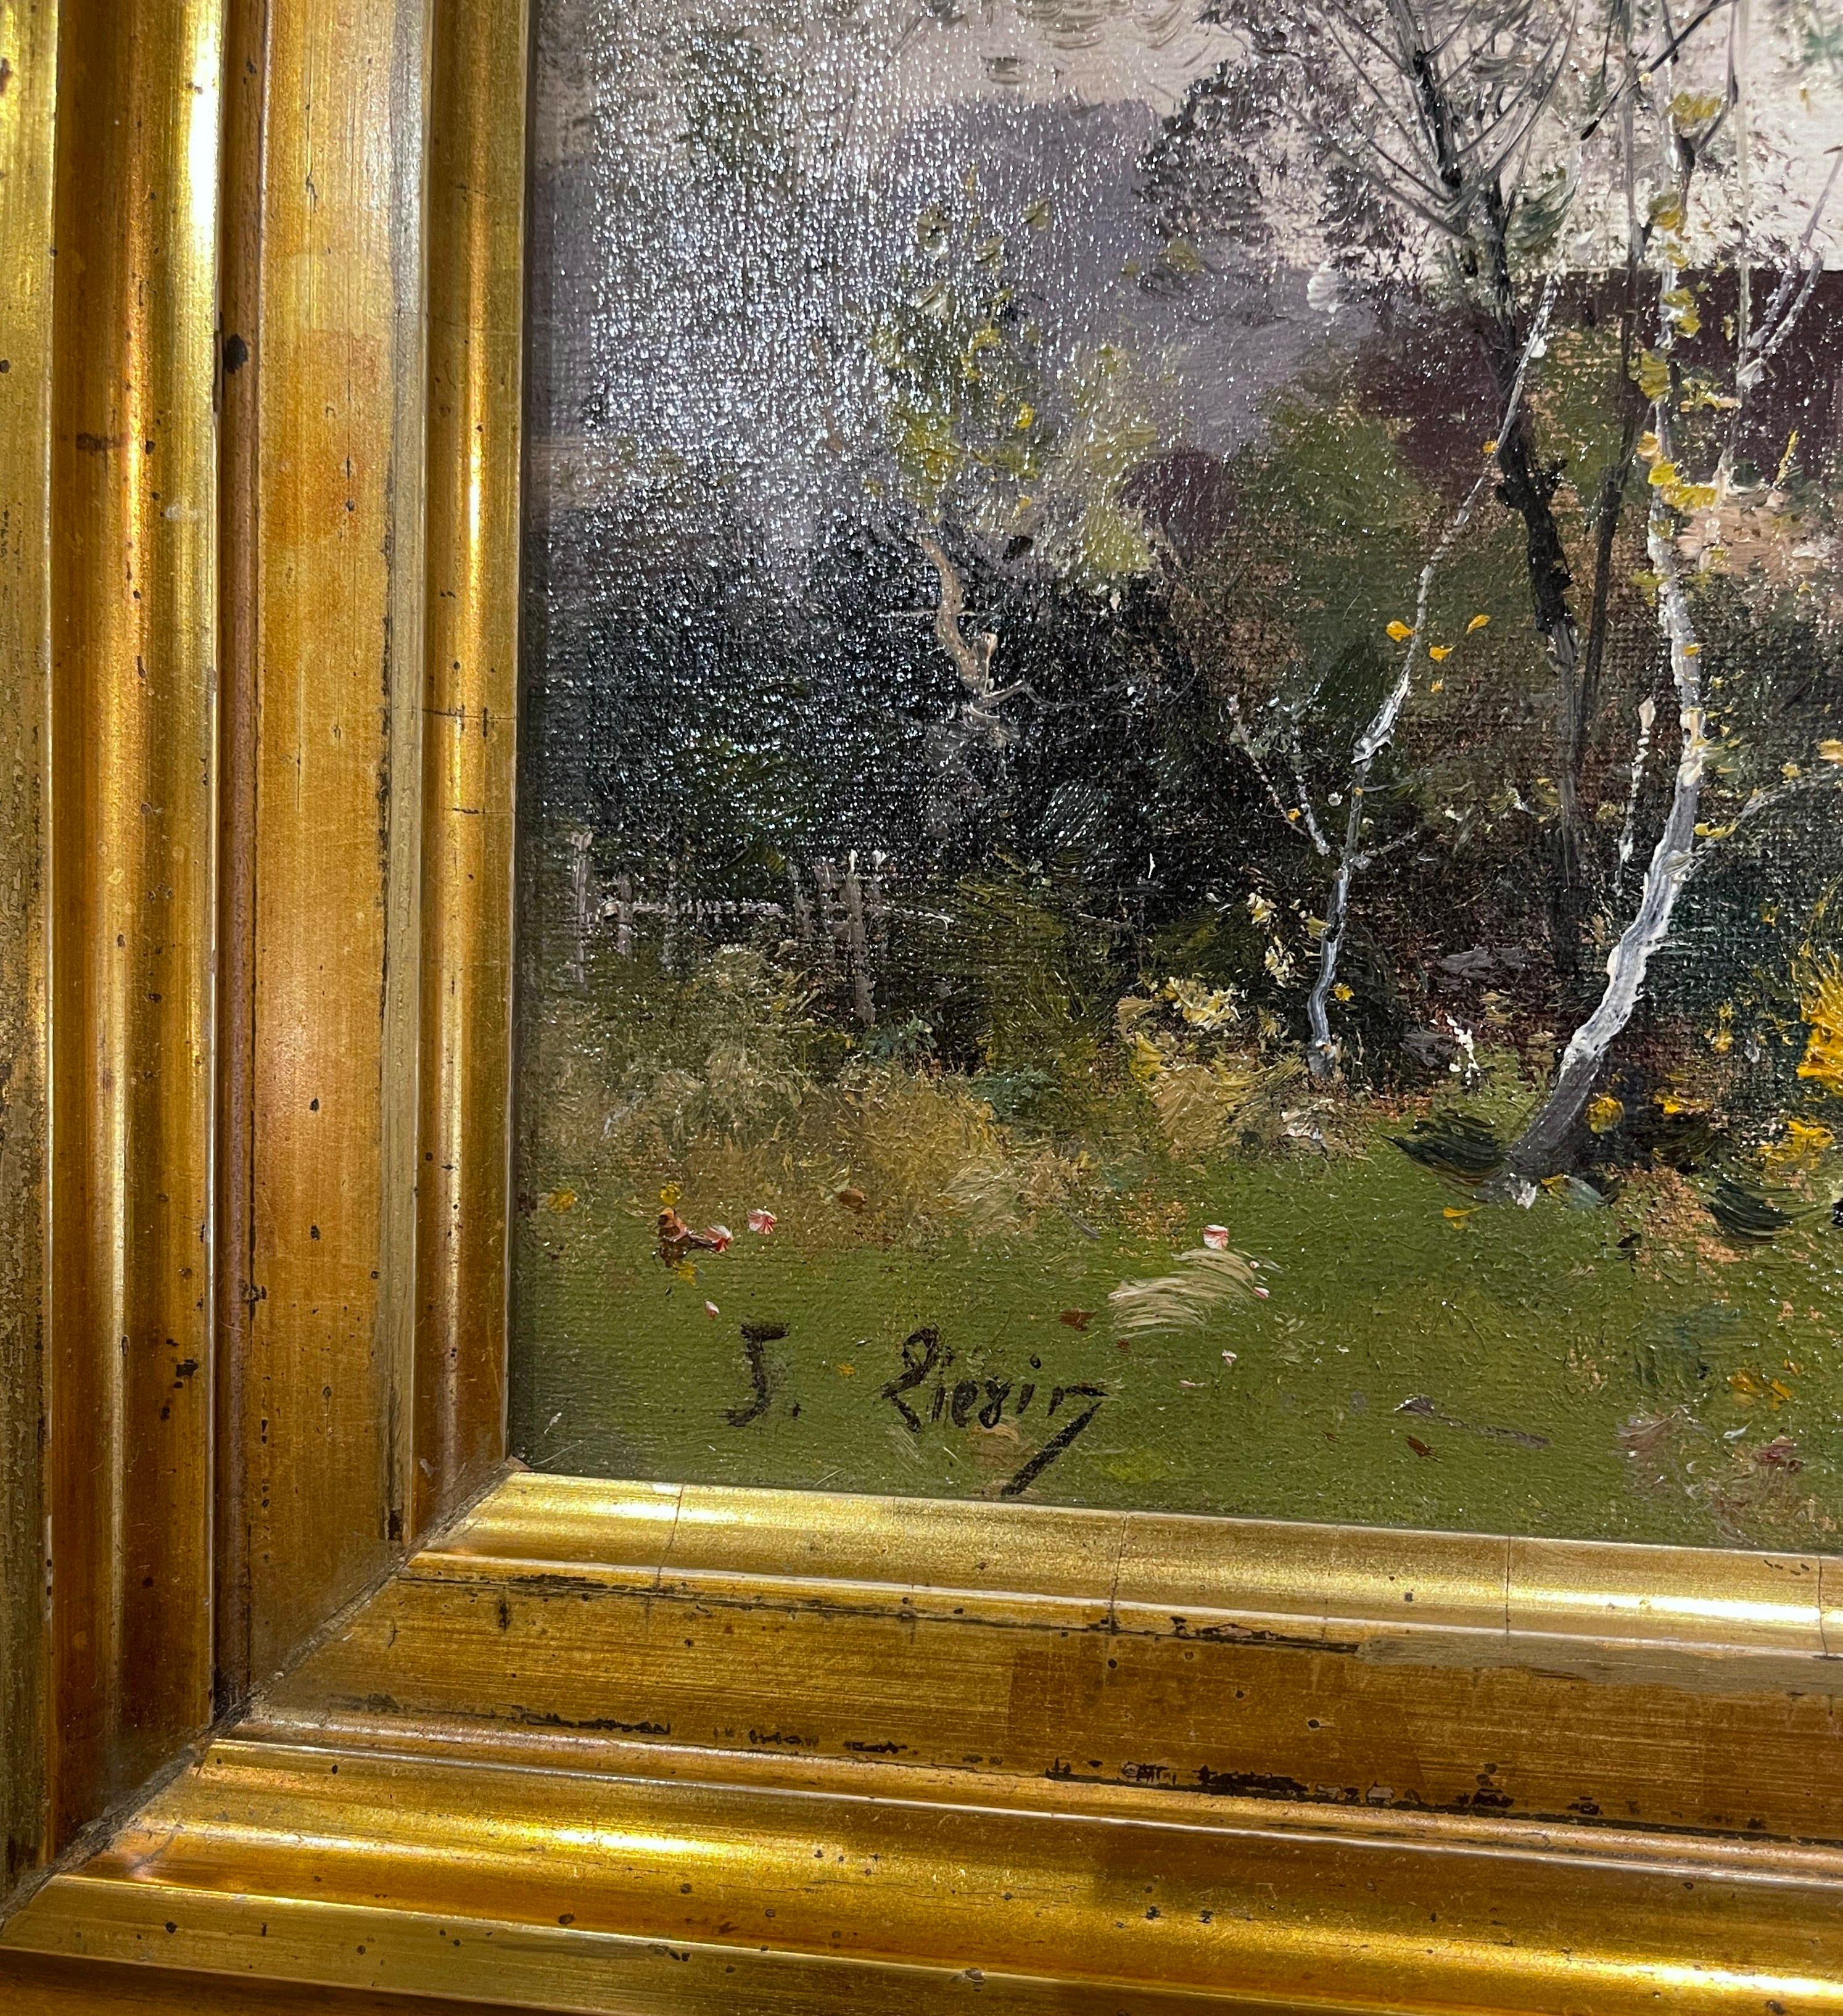 19th Century Framed Landscape Oil Painting Signed J. Lievin for E. Galien-Laloue For Sale 3